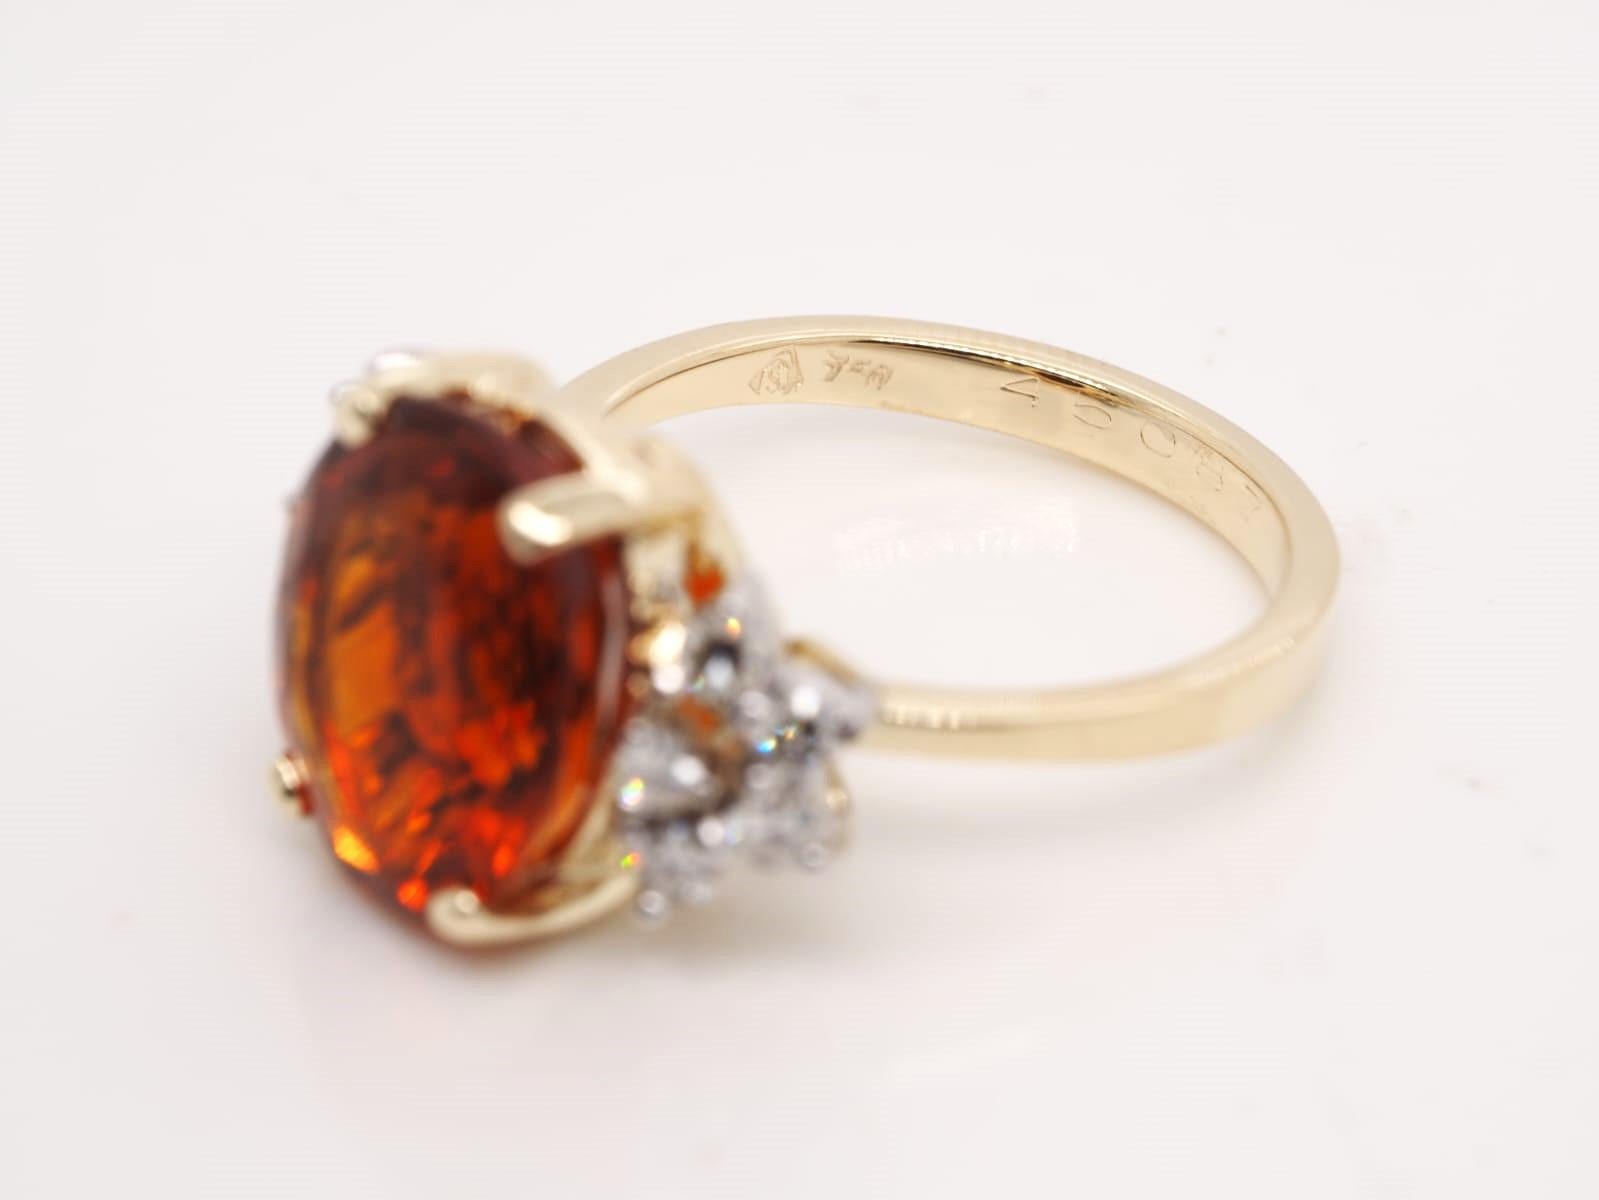 H. Stern 18K Yellow Gold Oval Citrine & 0.35 ct Round Diamond Ring  In Excellent Condition For Sale In Addison, TX